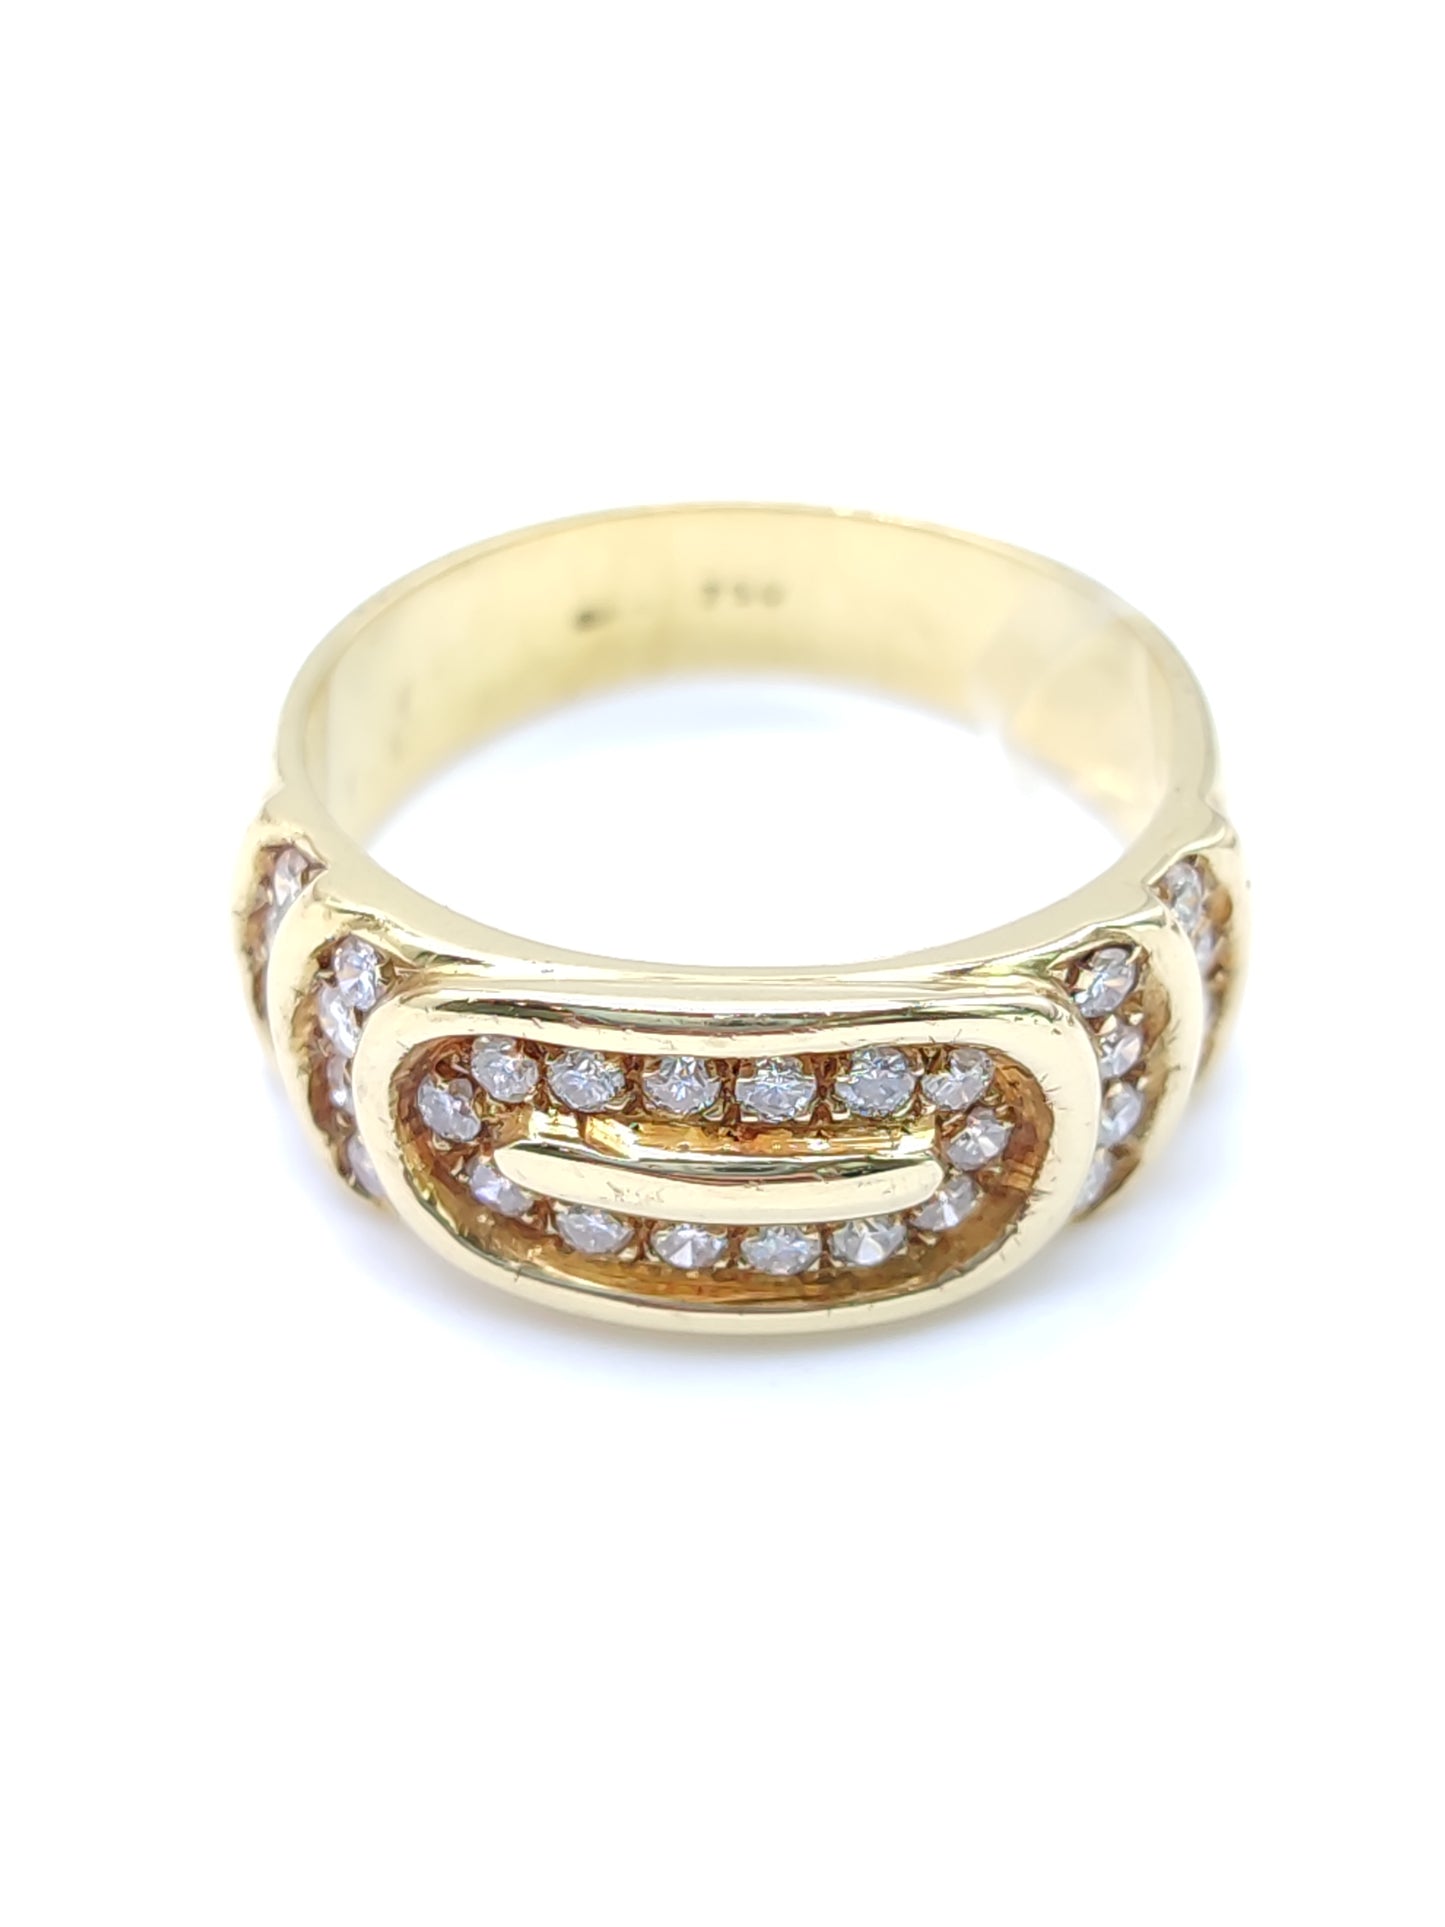 Pavan - Gold band ring with diamonds